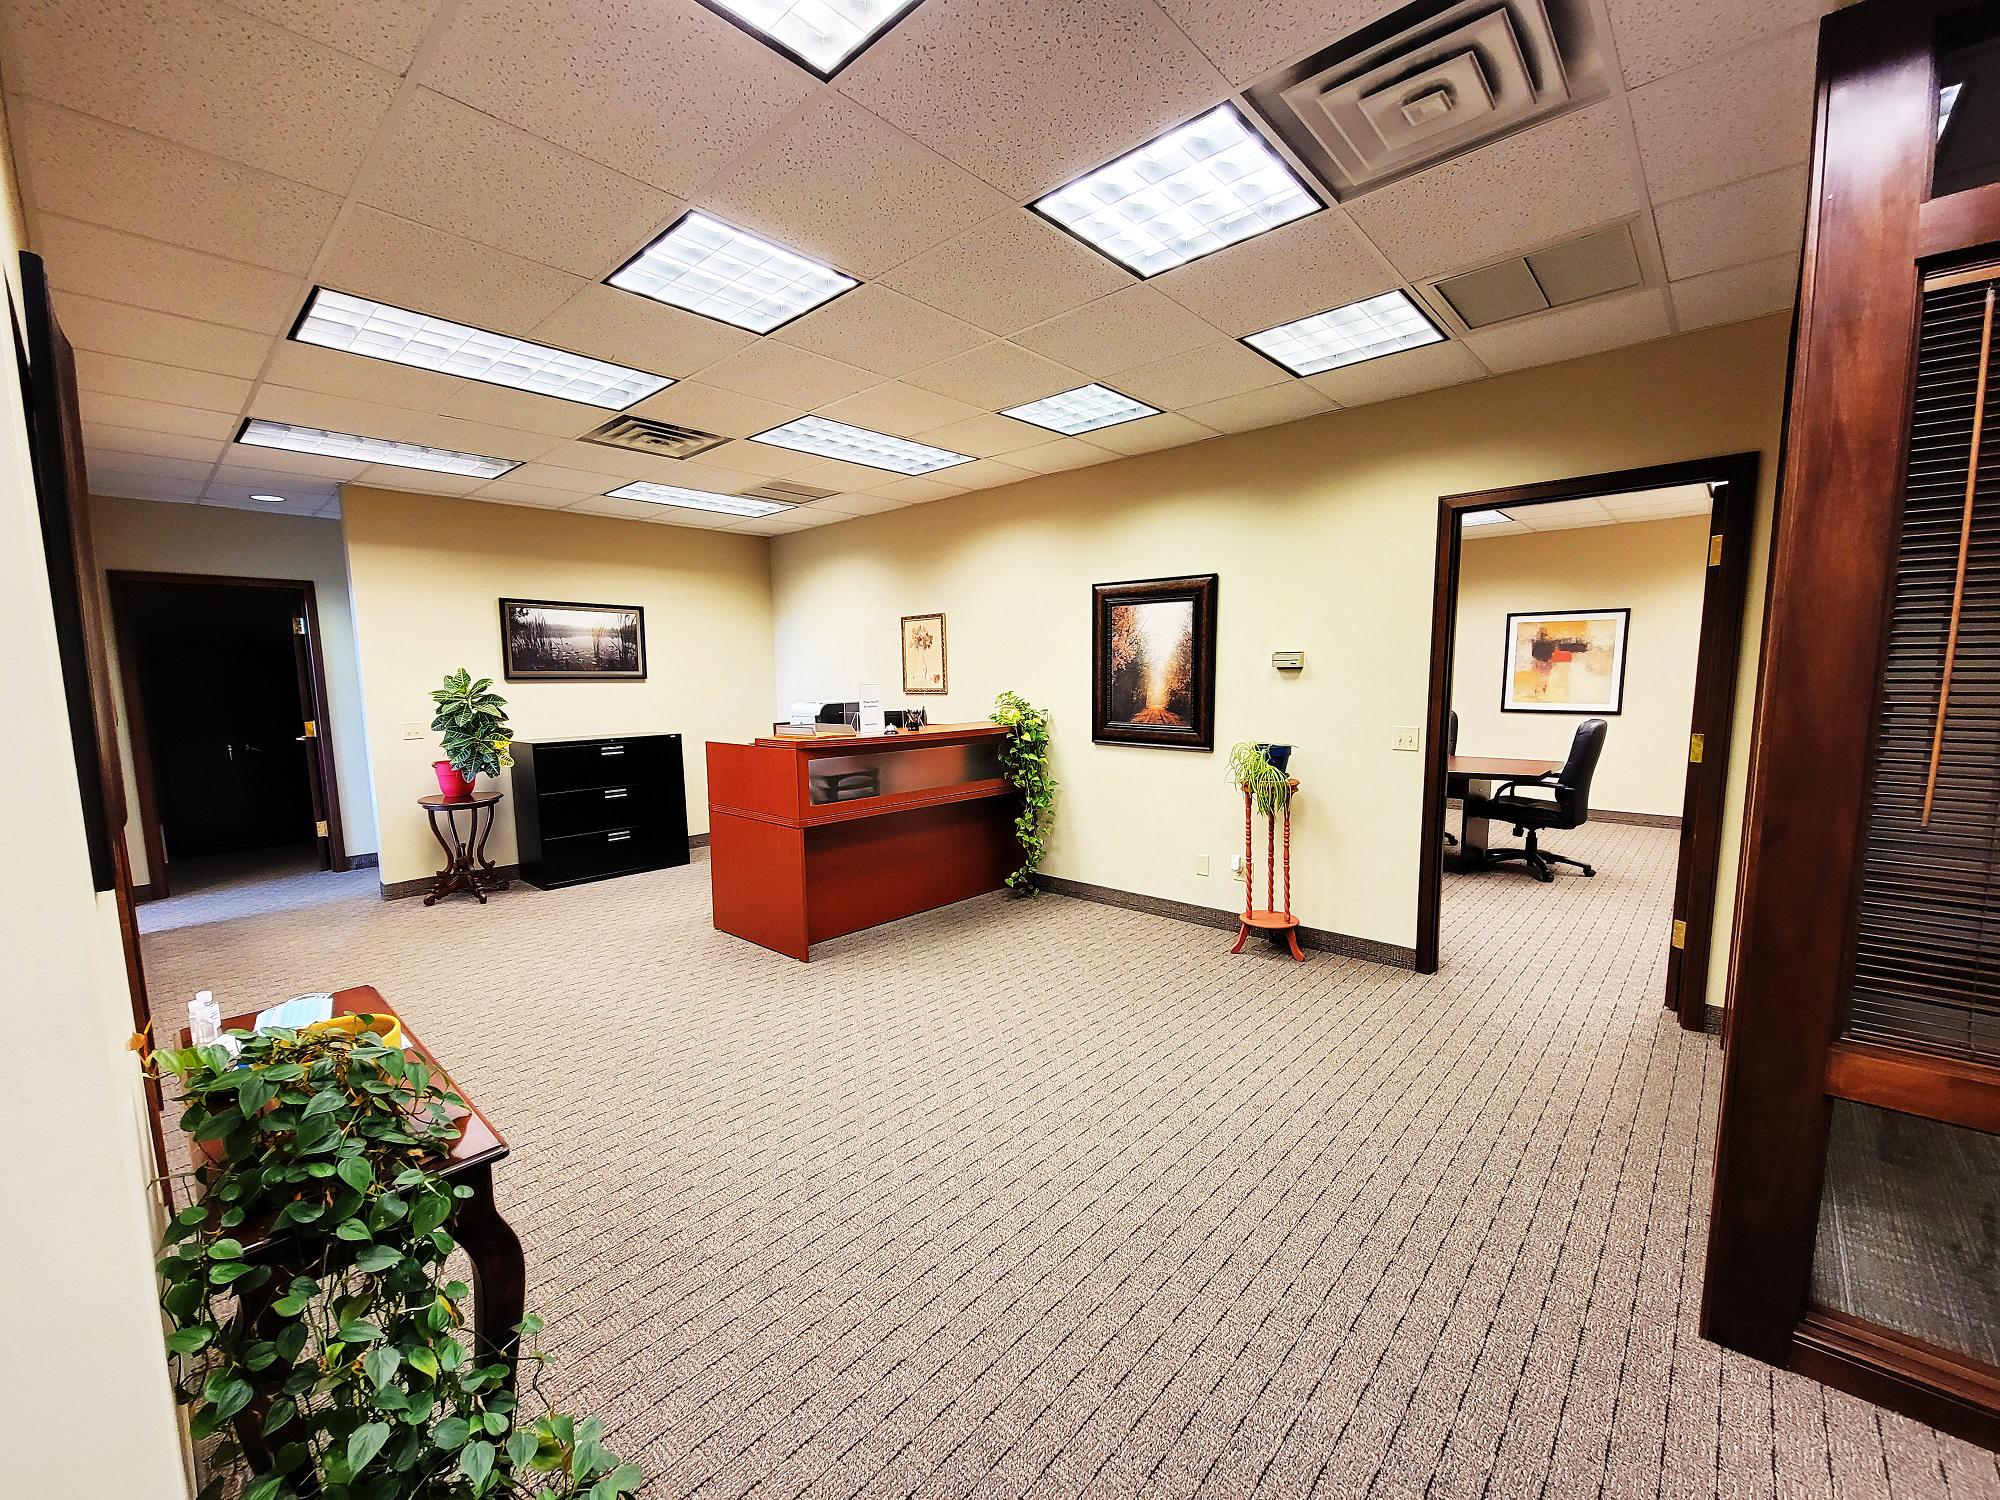 Wausau personal injury office lobby and entrance